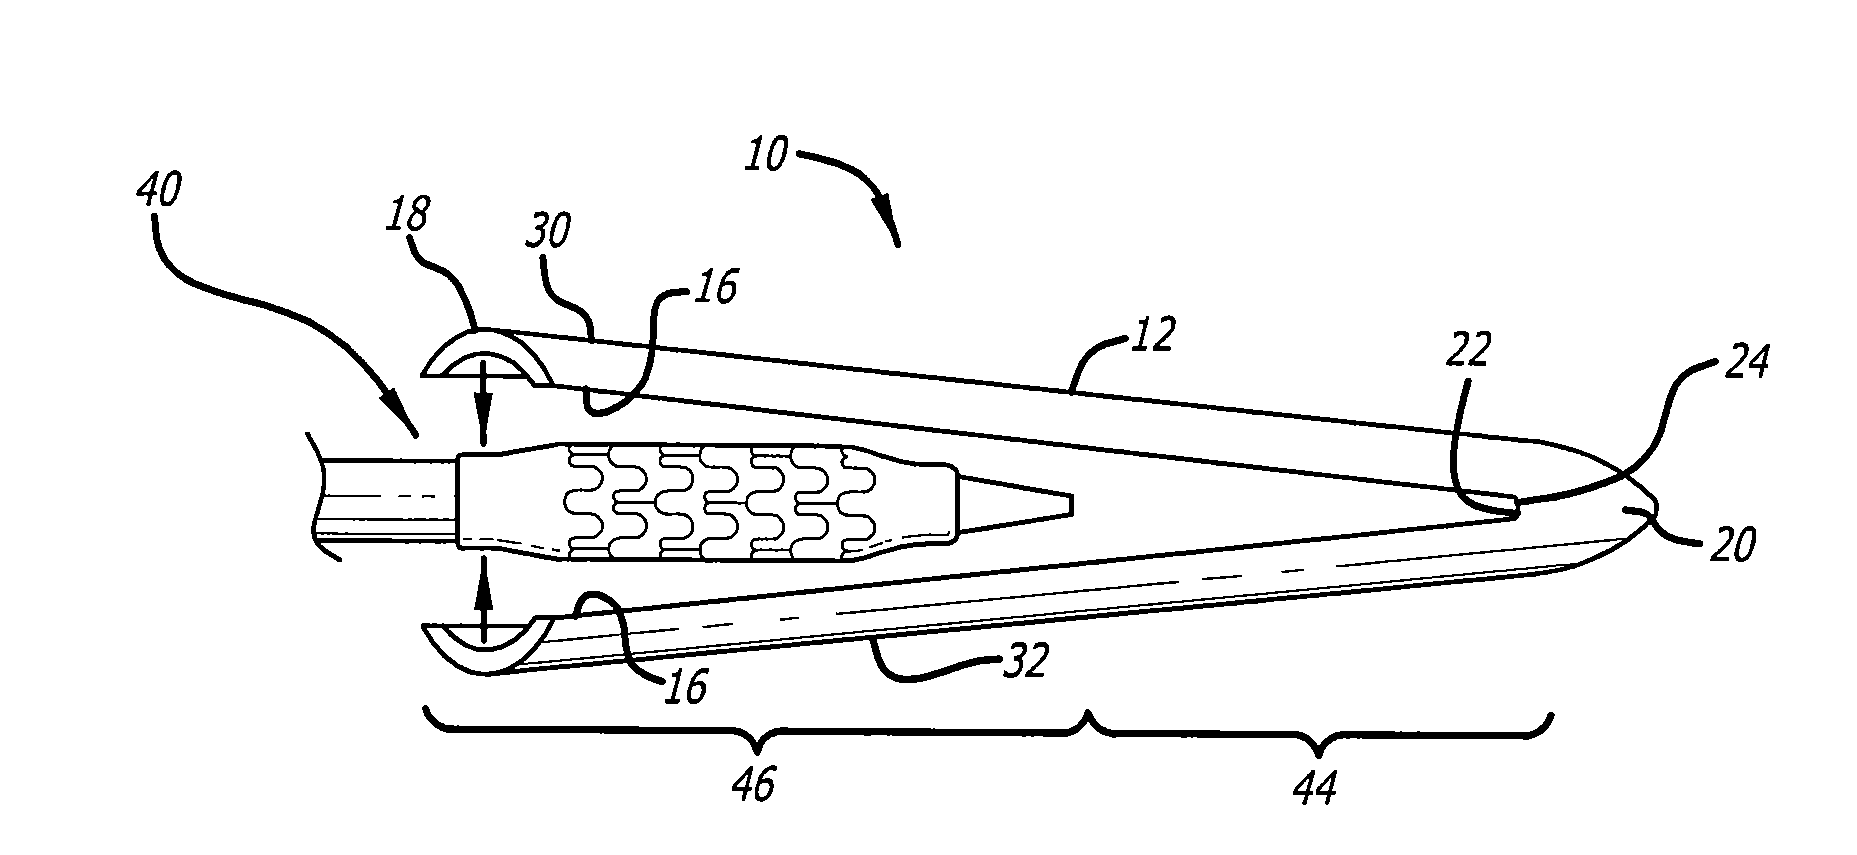 Dual sheath assembly and method of use